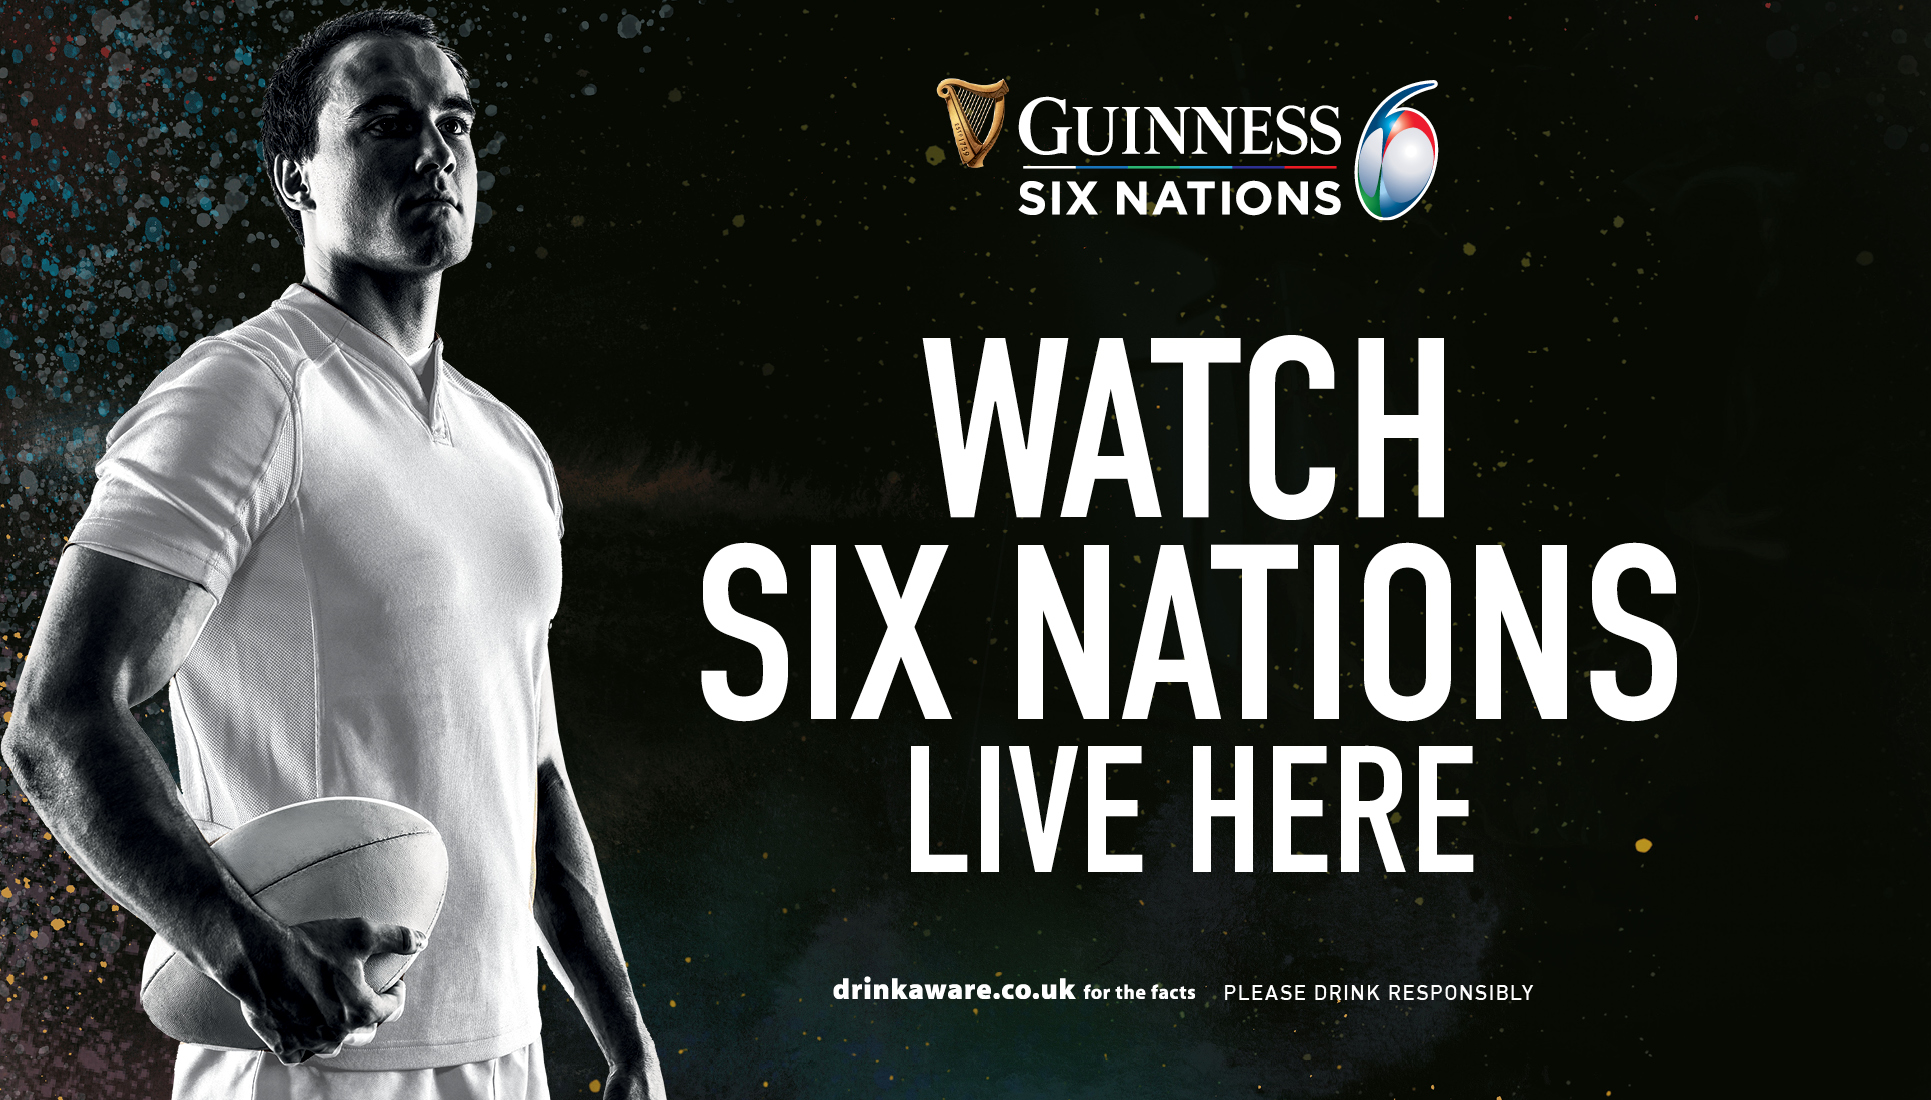 Join us for Six Nations!